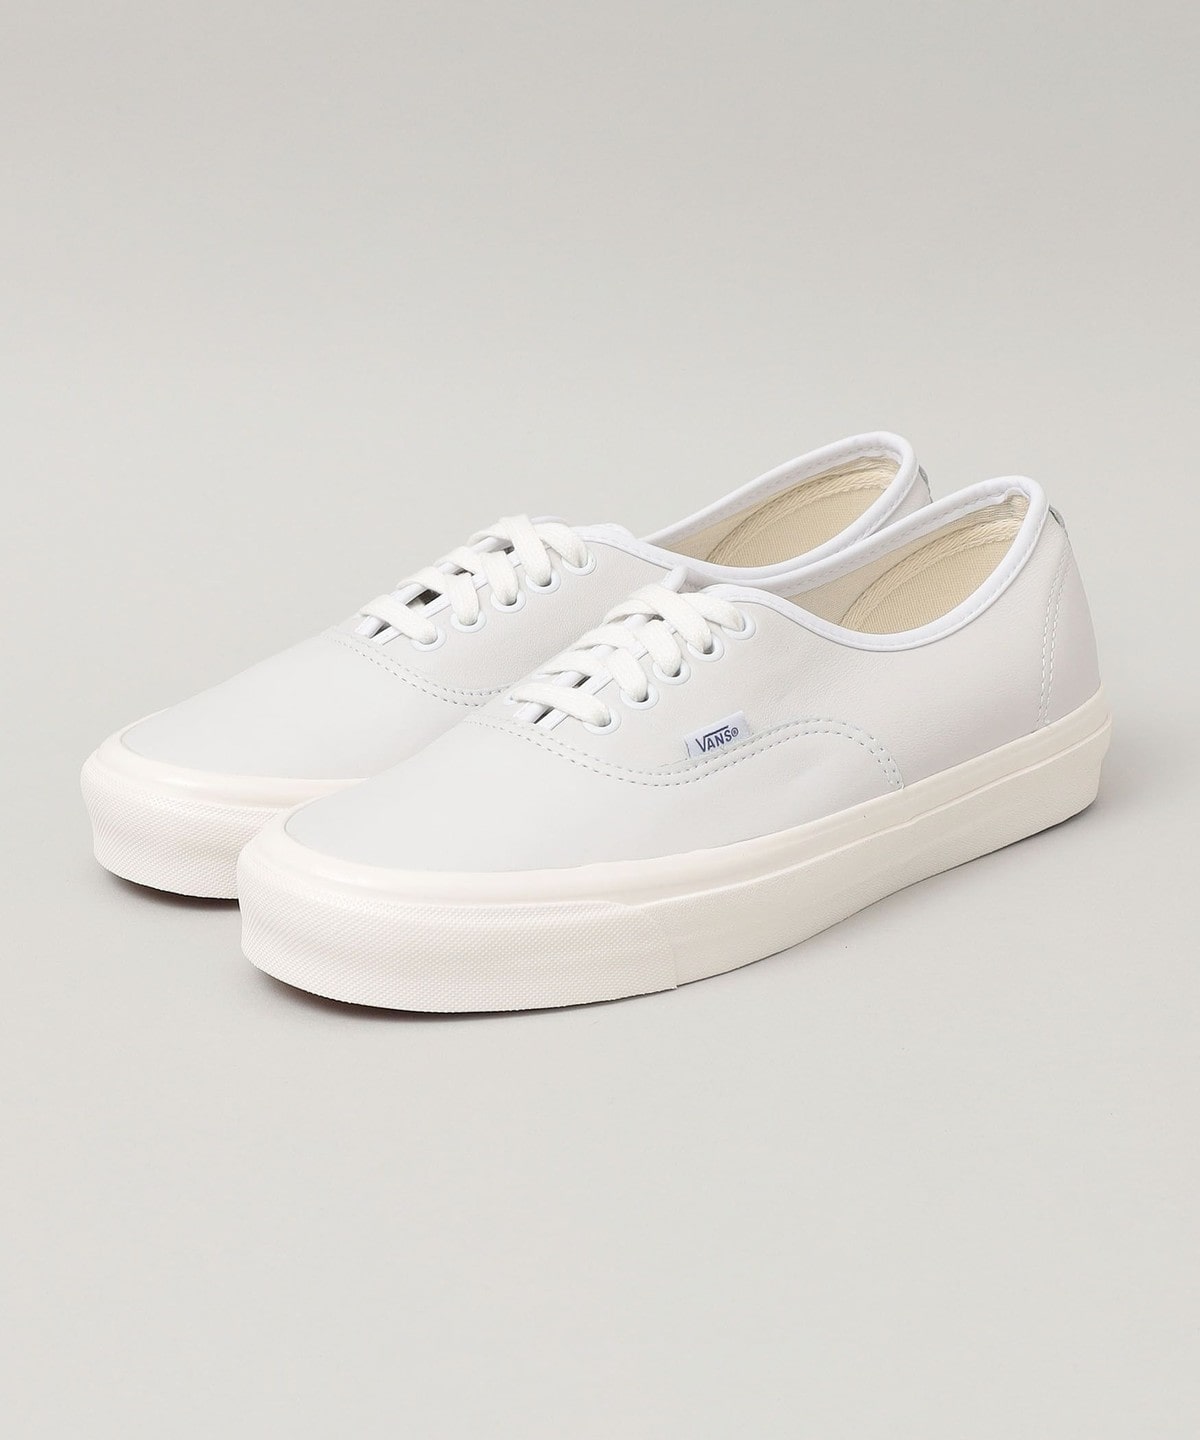 VANS: AUTHENTIC 44 DX LEATHER オフホワイト